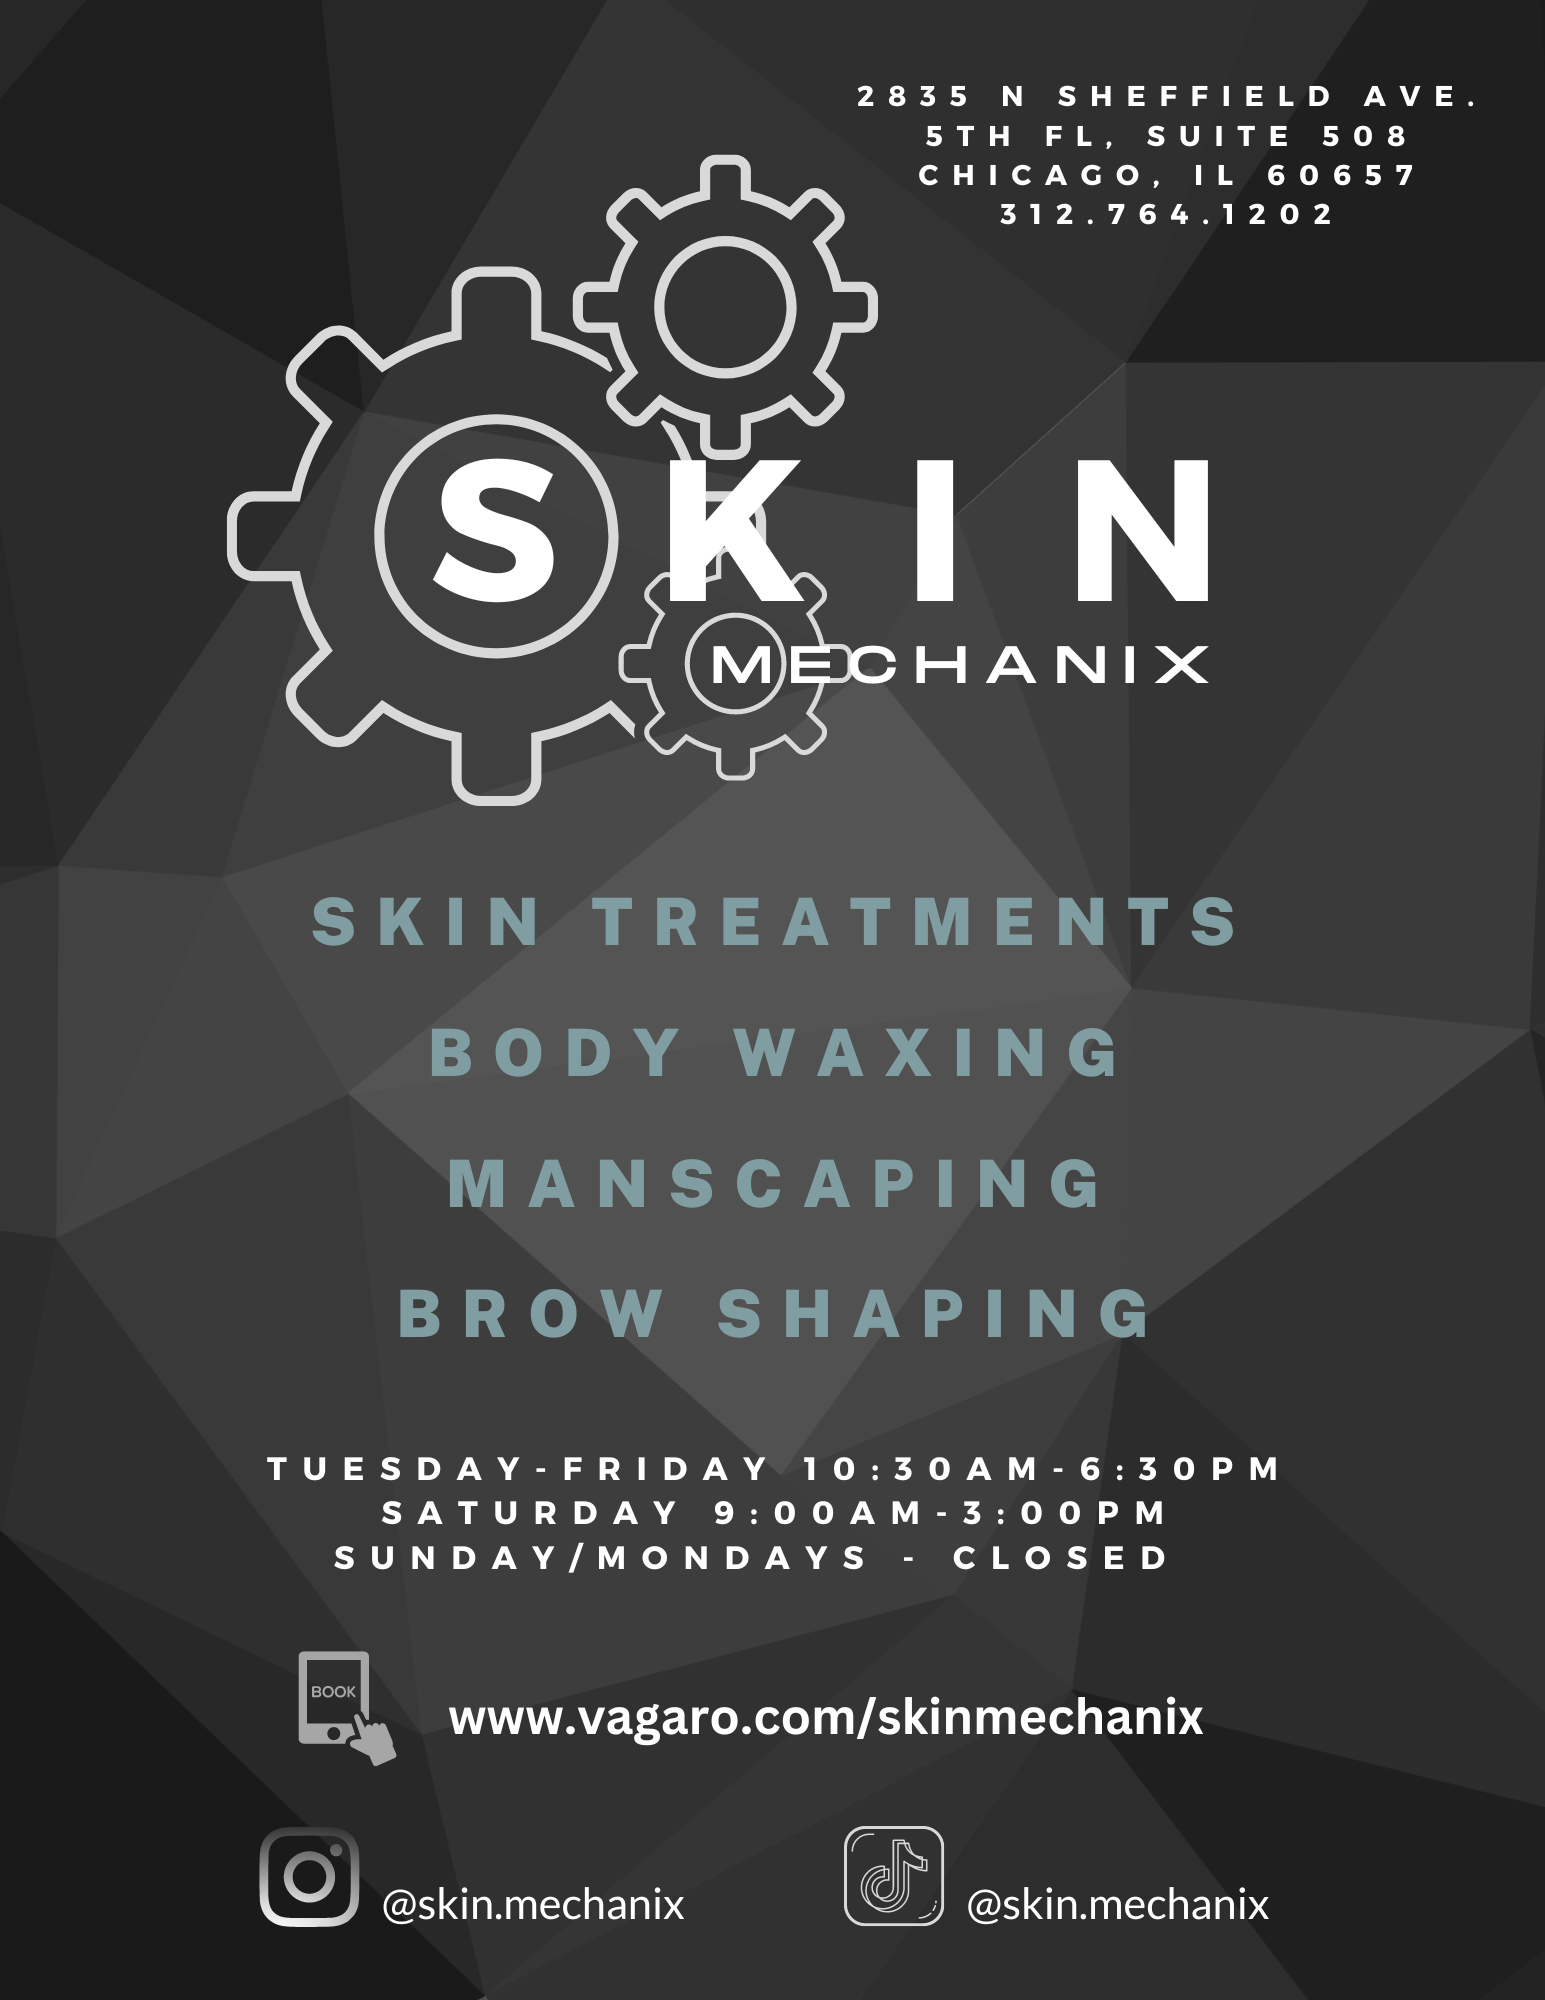 Skin Mechanix Aesthetics Services now partnering with Wellness Homes of Chicago